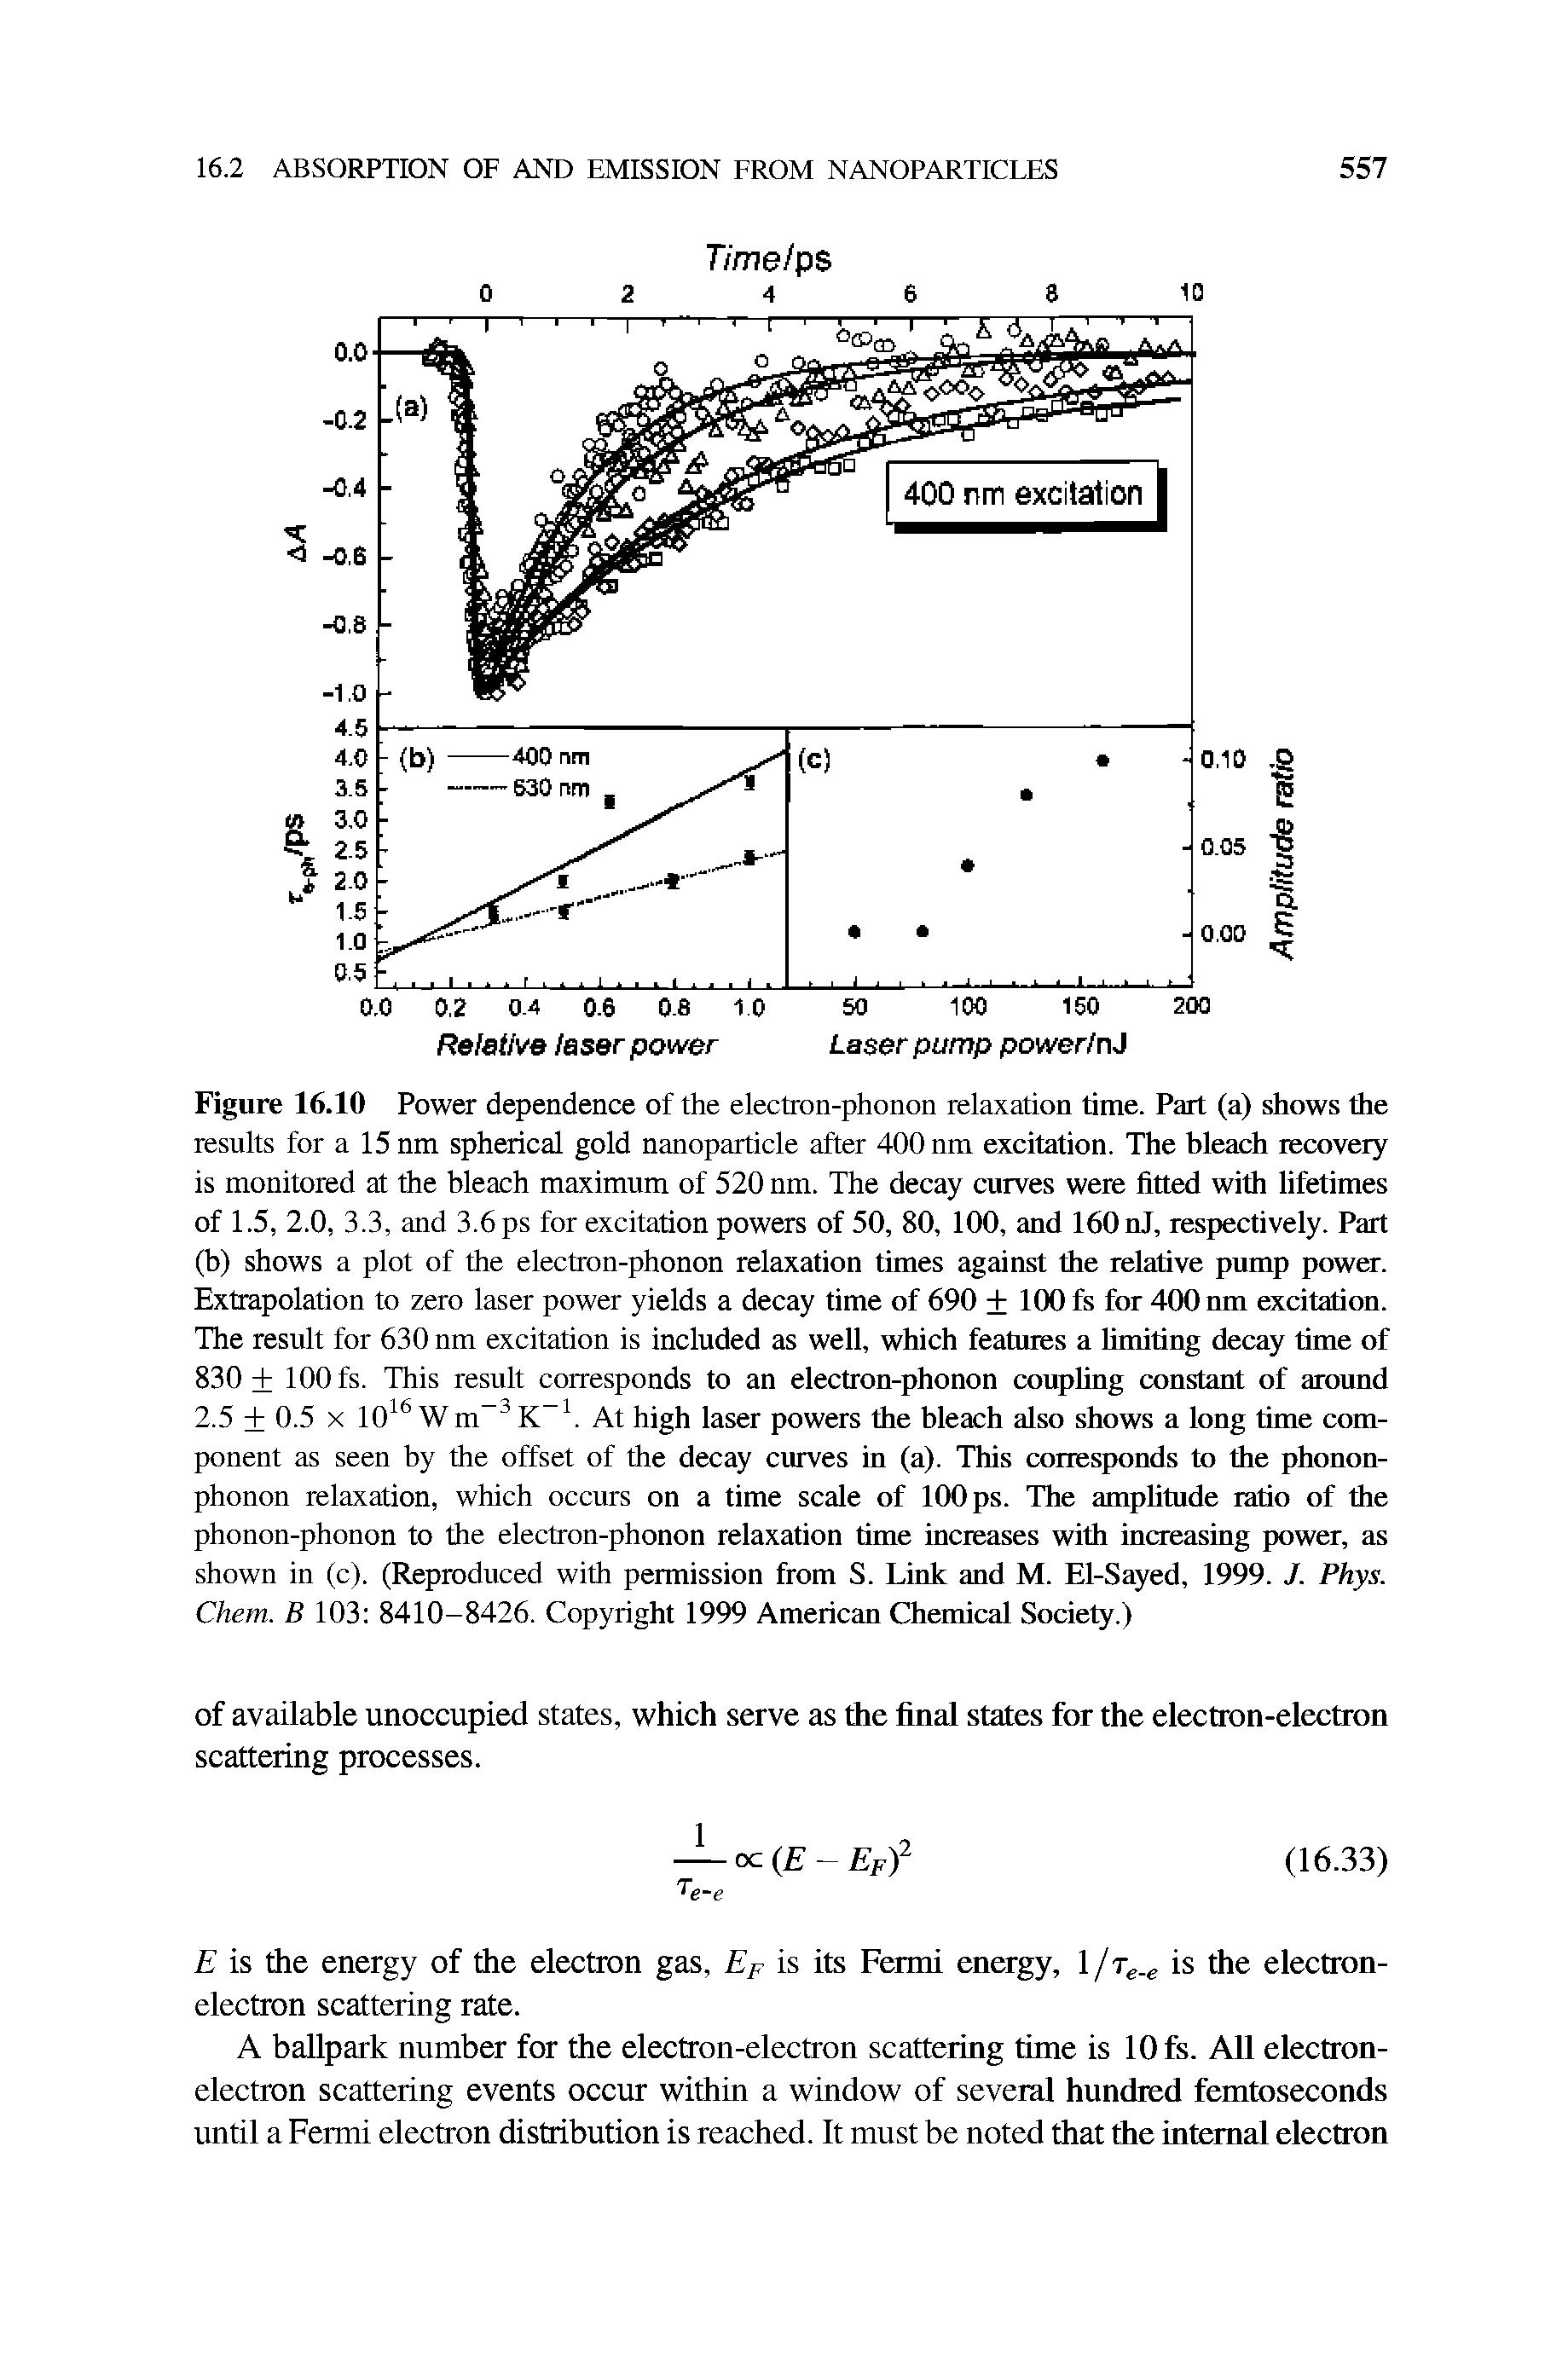 Figure 16.10 Power dependence of the electron-phonon relaxation time. Part (a) shows the results for a 15 nm spherical gold nanoparticle after 400 nm excitation. The bleach recovery is monitored at the bleach maximum of 520 nm. The decay curves were fitted with lifetimes of 1.5, 2.0, 3.3, and 3.6 ps for excitation powers of 50, 80, 100, and 160nj, respectively. Part (b) shows a plot of the electron-phonon relaxation times against the relative pump power. Extrapolation to zero laser power yields a decay time of 690 + 100 fs for 400 nm excitation. The result for 630 nm excitation is included as well, which features a hmiting decay time of 830 + 100 fs. This result corresponds to an electron-phonon couphng constant of around 2.5 + 0.5 X 10 Wm At high laser powers the bleach also shows a long time component as seen by the offset of the decay curves in (a). This corresponds to the phonon-phonon relaxation, which occurs on a time scale of 100 ps. The amphtude ratio of the phonon-phonon to the electron-phonon relaxation time increases with increasing power, as shown in (c). (Reproduced with permission from S. Link and M. El-Sayed, 1999. J. Phys. Chem. B 103 8410-8426. Copyright 1999 American Chemical Society.)...